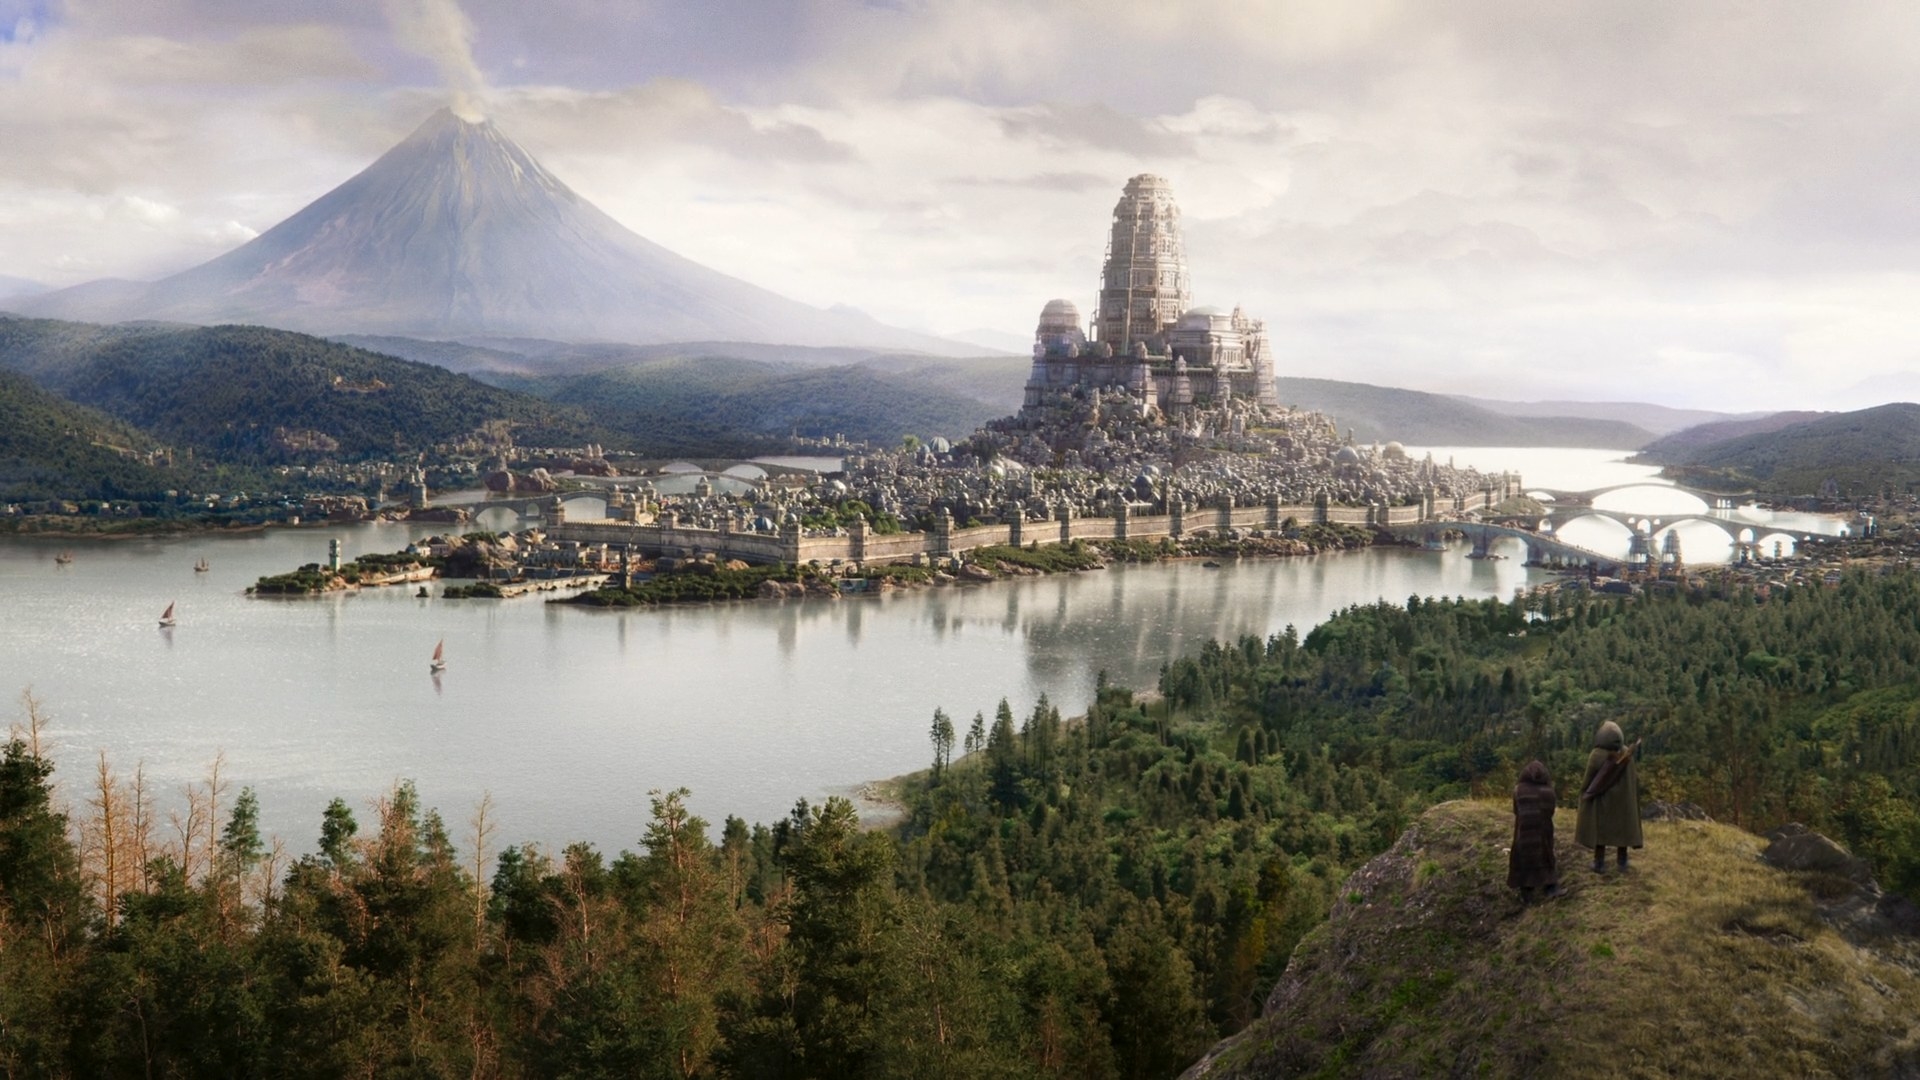 A wide, establishing shot shows Tar Valon on an island in the middle of a river. It is dominated by a massive structure rising out of the middle of the island, the White Tower. In the distance, we can see a huge, smoking volcano